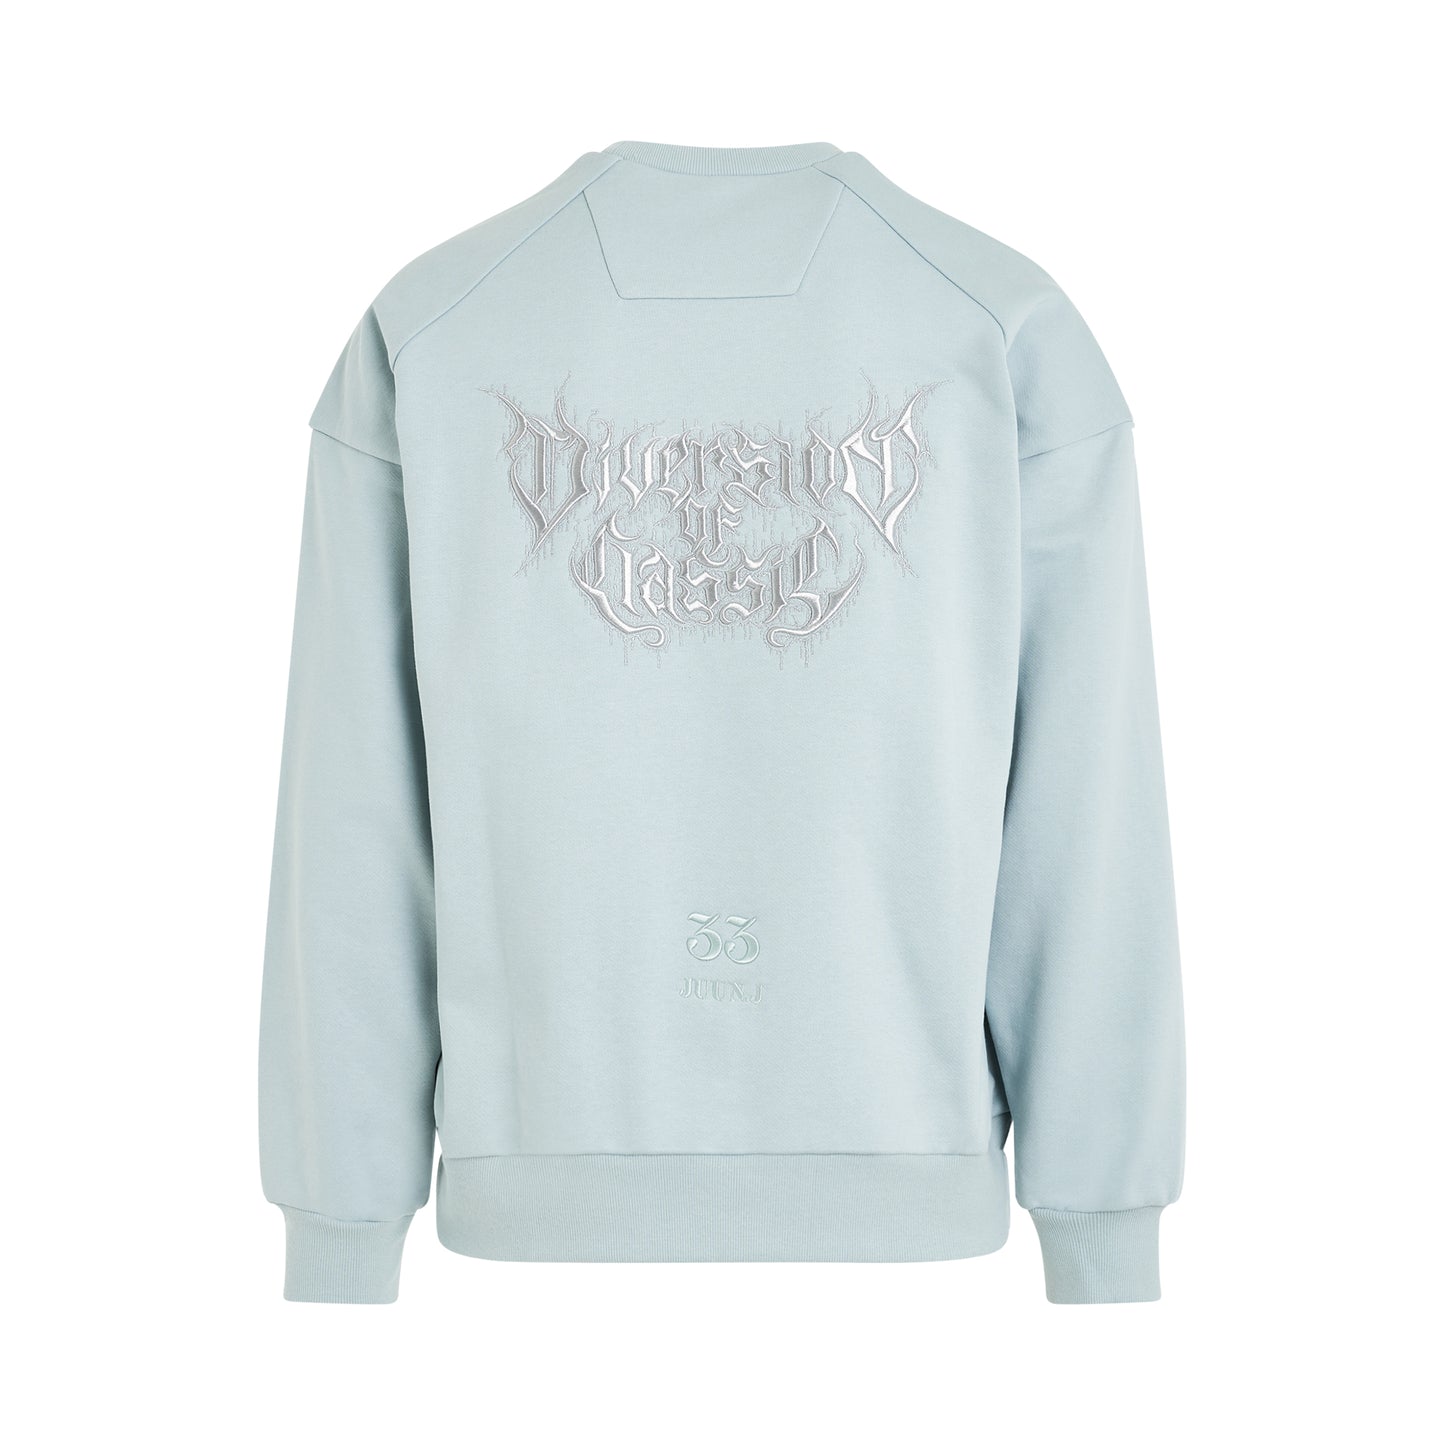 Loose Fit Graphic Embroidered Sweatshirt in Sky Blue